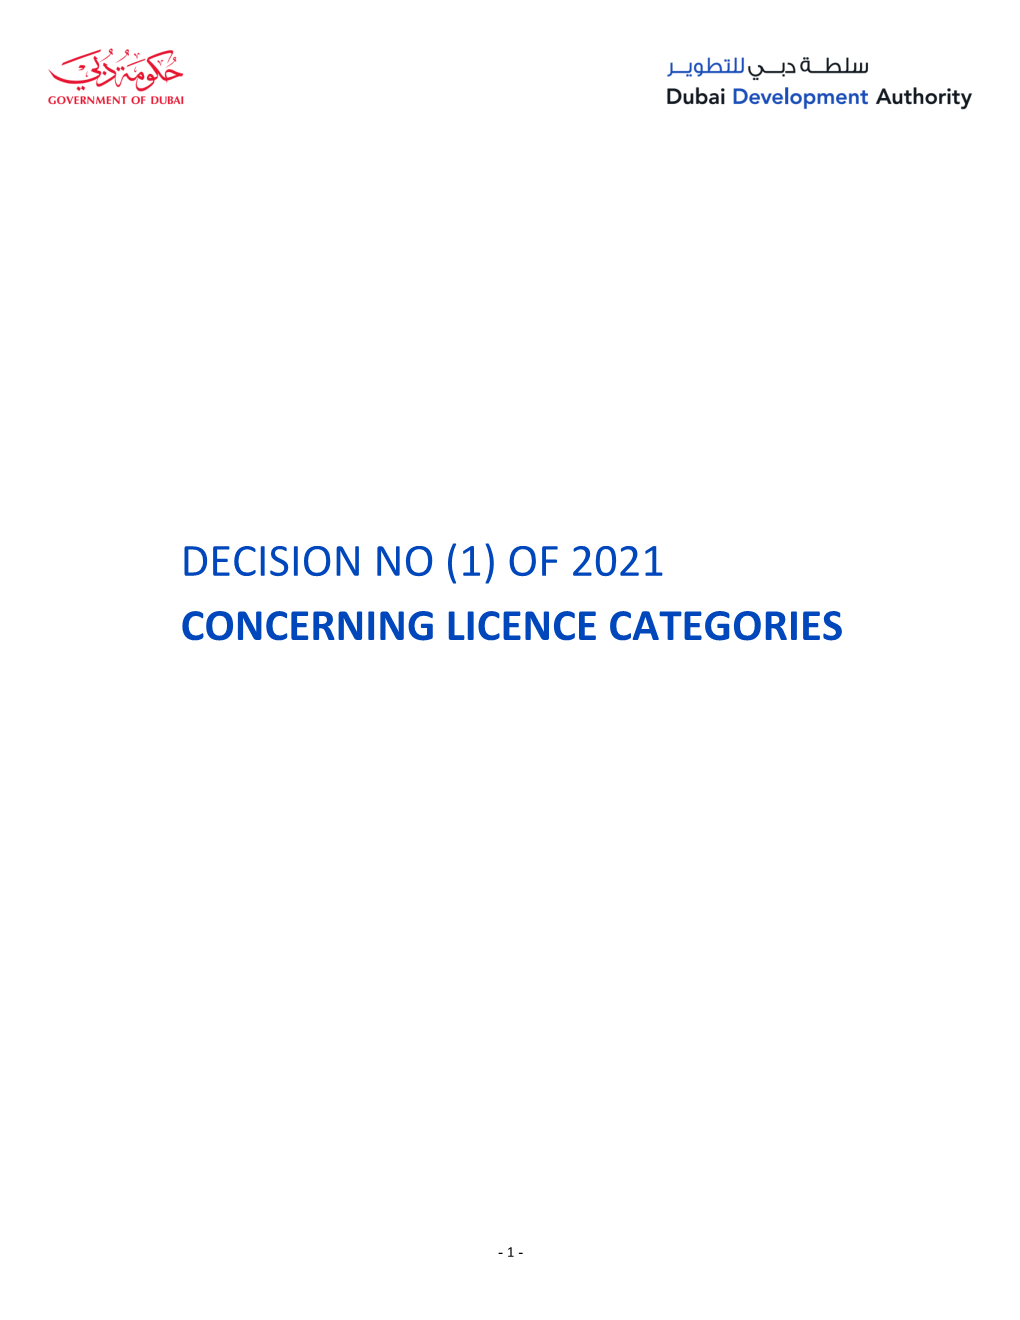 Decision No (1) of 2021 Concerning Licence Categories